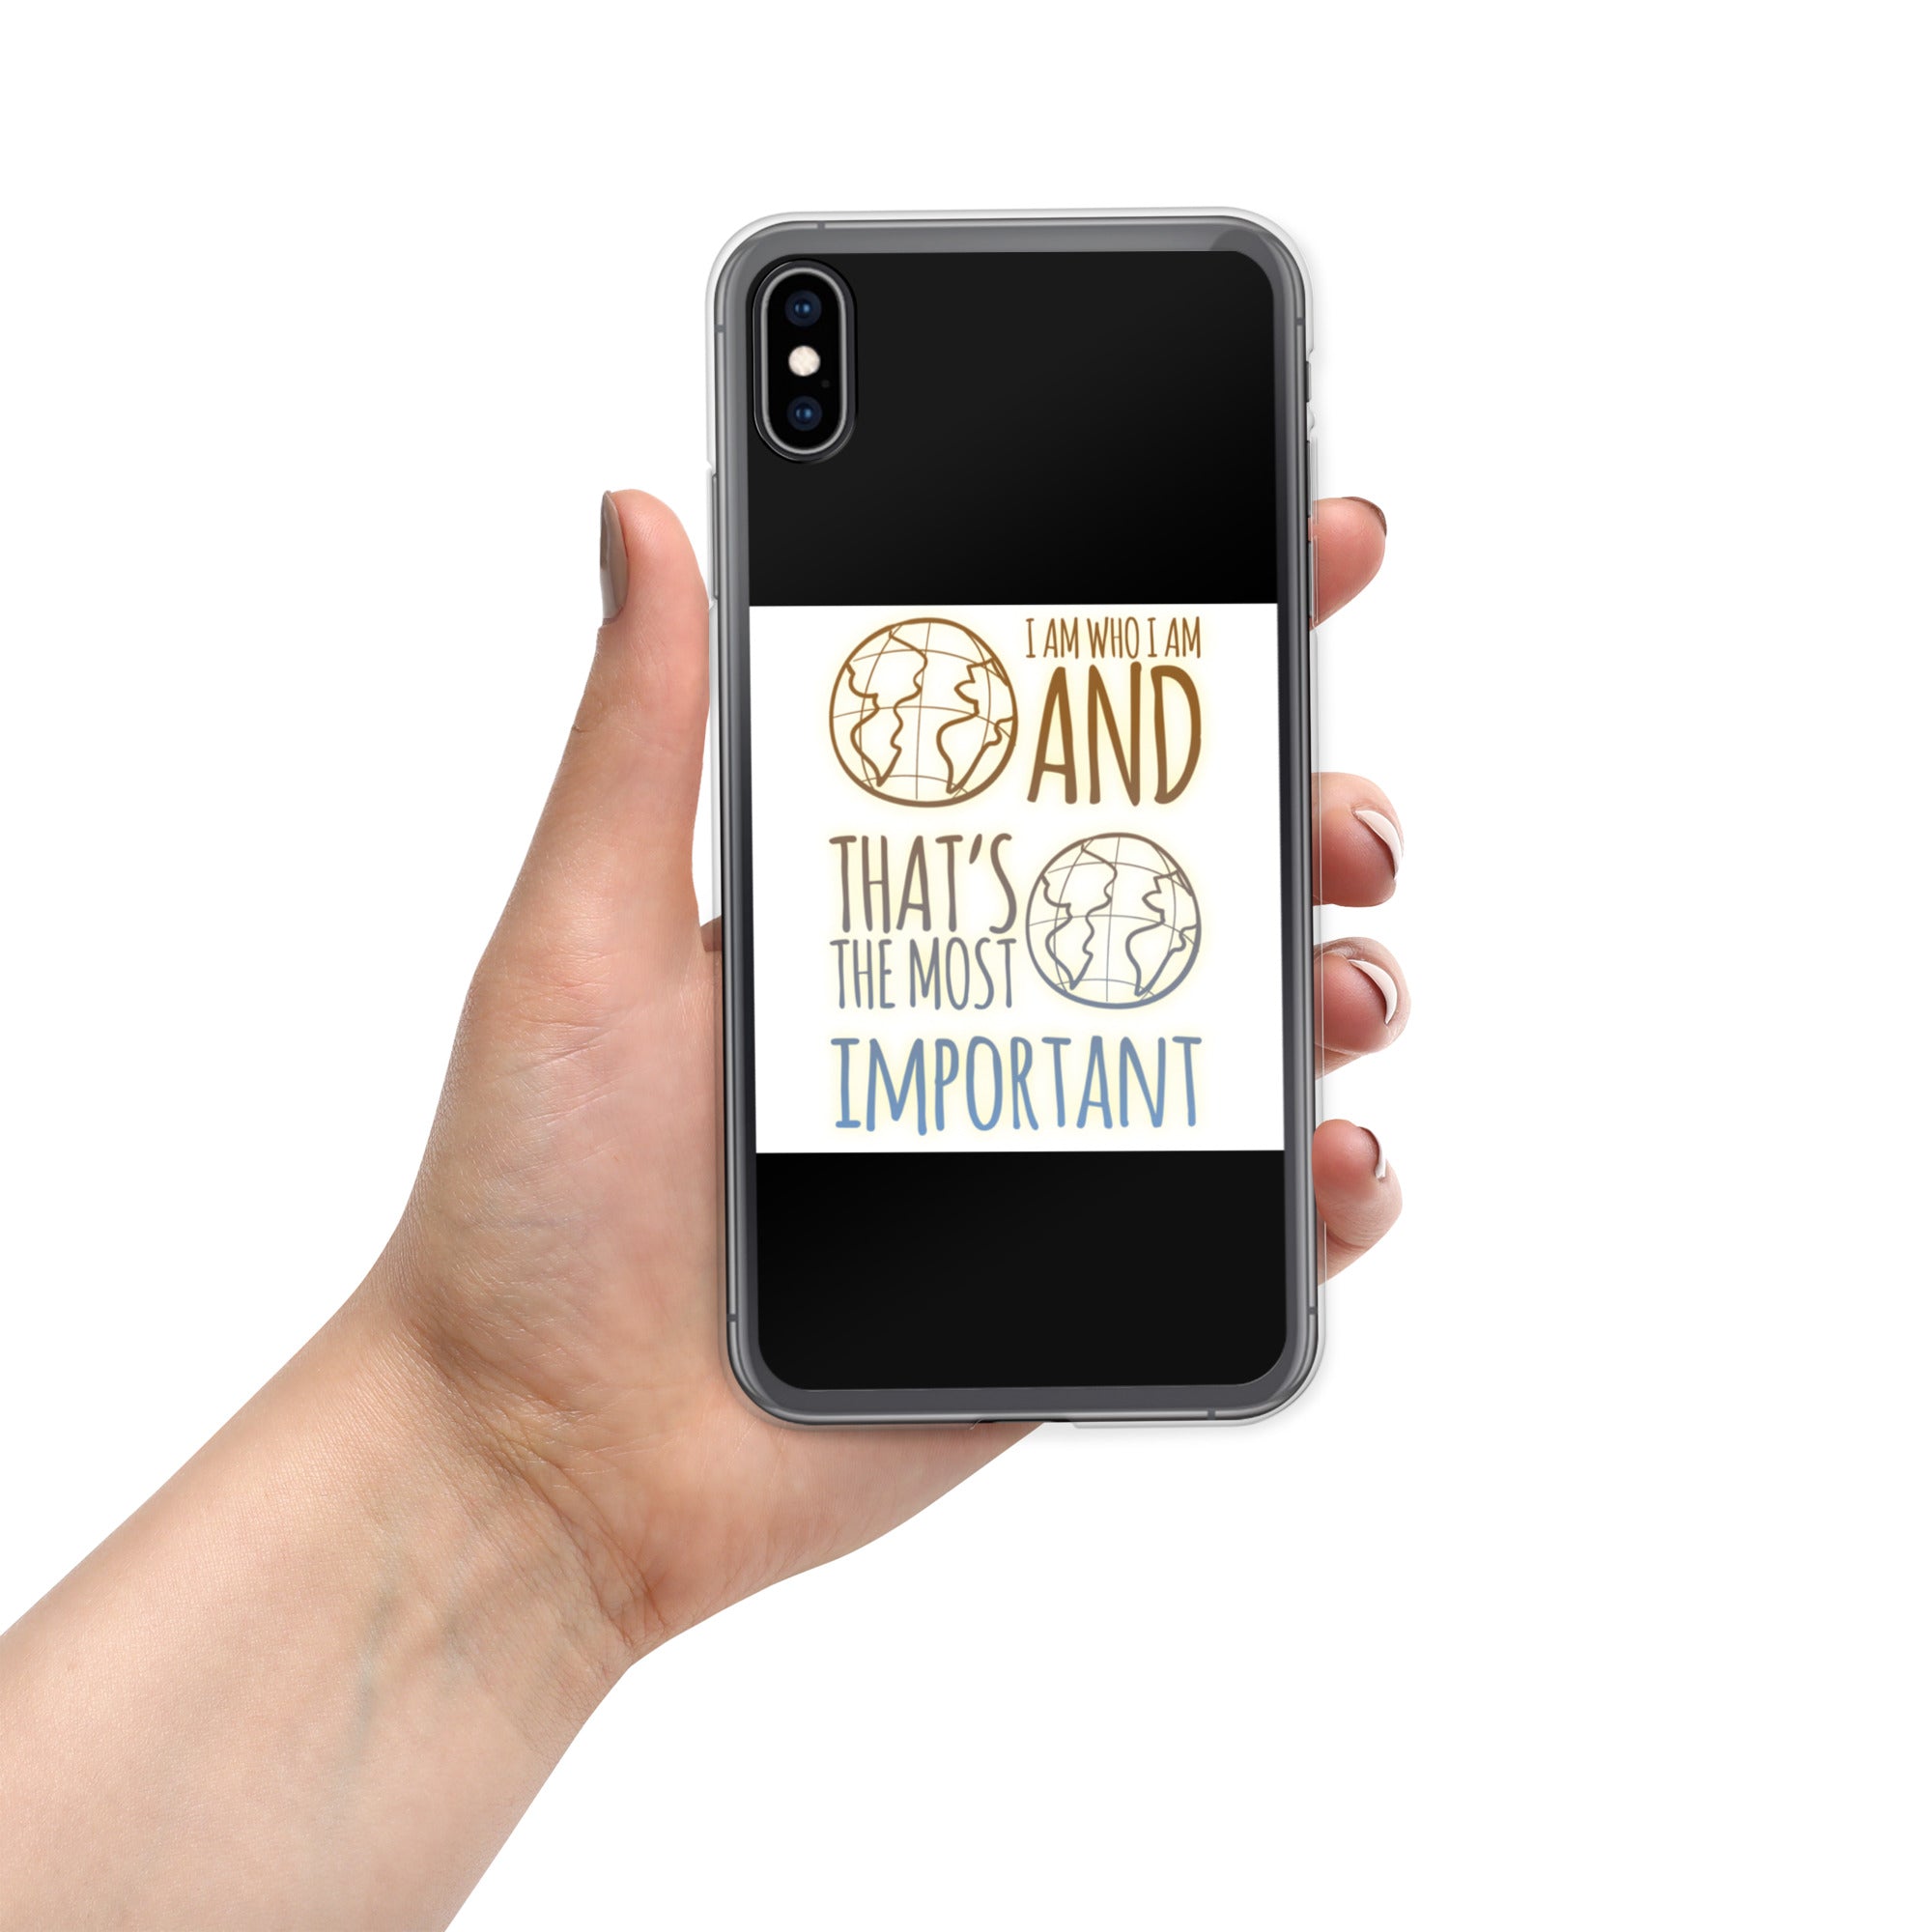 GloWell Designs - iPhone Case - Affirmation Quote - I Am Who I Am - GloWell Designs